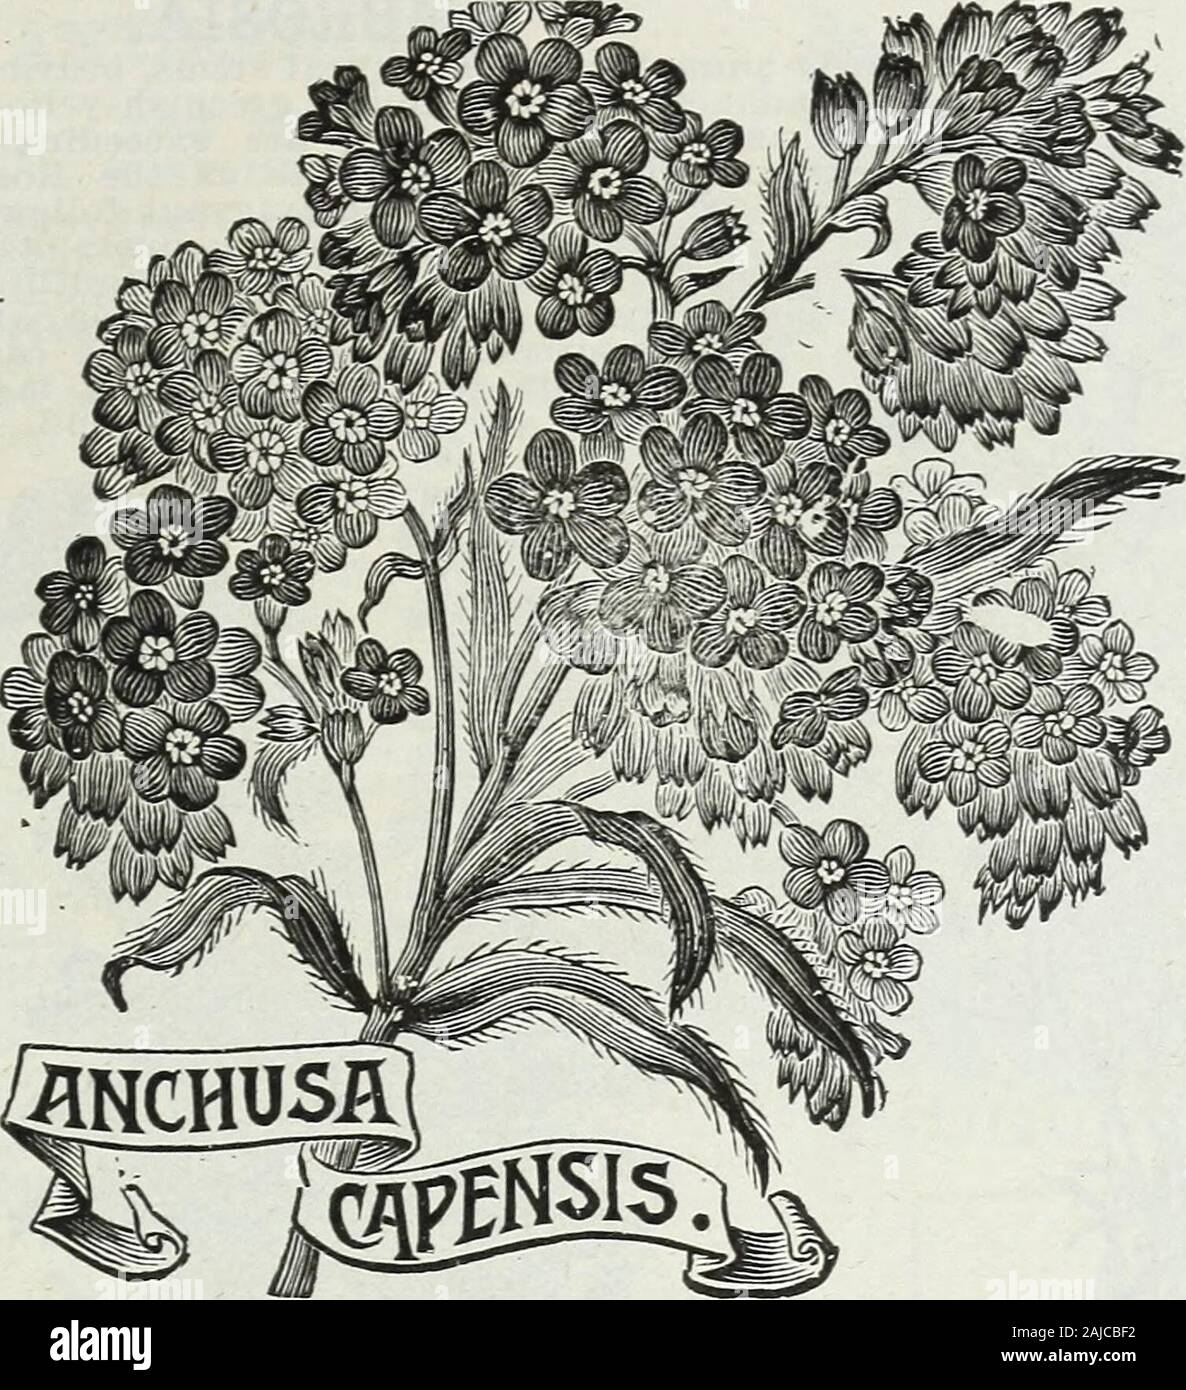 Lippincott seeds : 1914 . ARABIS ALPINA. MISS C. H. LIPPINCOTT, HUDSON, WISCONSIN. 15. ALYSSUM. L.ITTL.E GEM—The plants are very dwarfEach spreads so as to completely cover a cir-cular space twelve to twenty inches in diam-eter. They soon become one mass of whiteremaining in full bloom from spring tofall—being densely studded with thebeautiful miniature spikes of delici-ously fragrant flowers. Tkt., 400seeds, 5 cts.; oz., 30 ct8. SAXATILE COMPACTUM.Showy golden flowers, hardy per-ennials, blooms the first season;excellent for rock work. Pkt.,250 seeds, 5 cts. SWEET—Its pure white, fra-grant fl Stock Photo